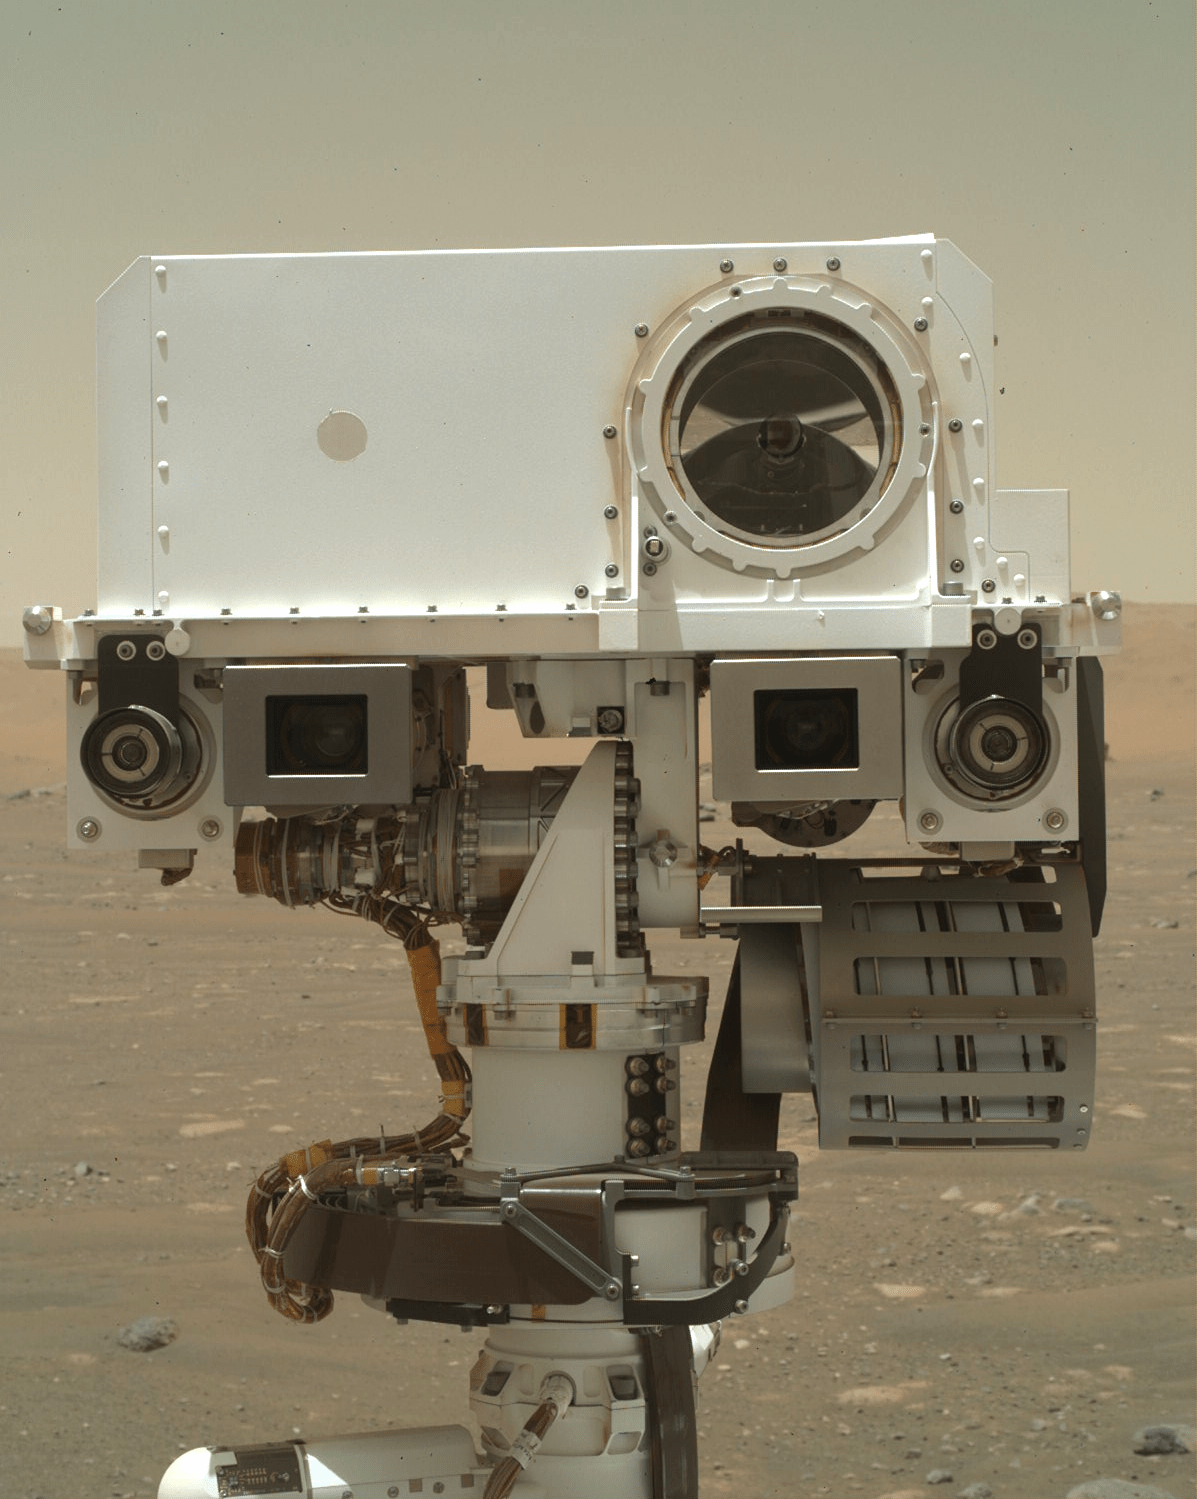 NASA's Mars Perseverance rover acquired this image using its SHERLOC WATSON camera, located on the turret at the end of the rover's robotic arm.